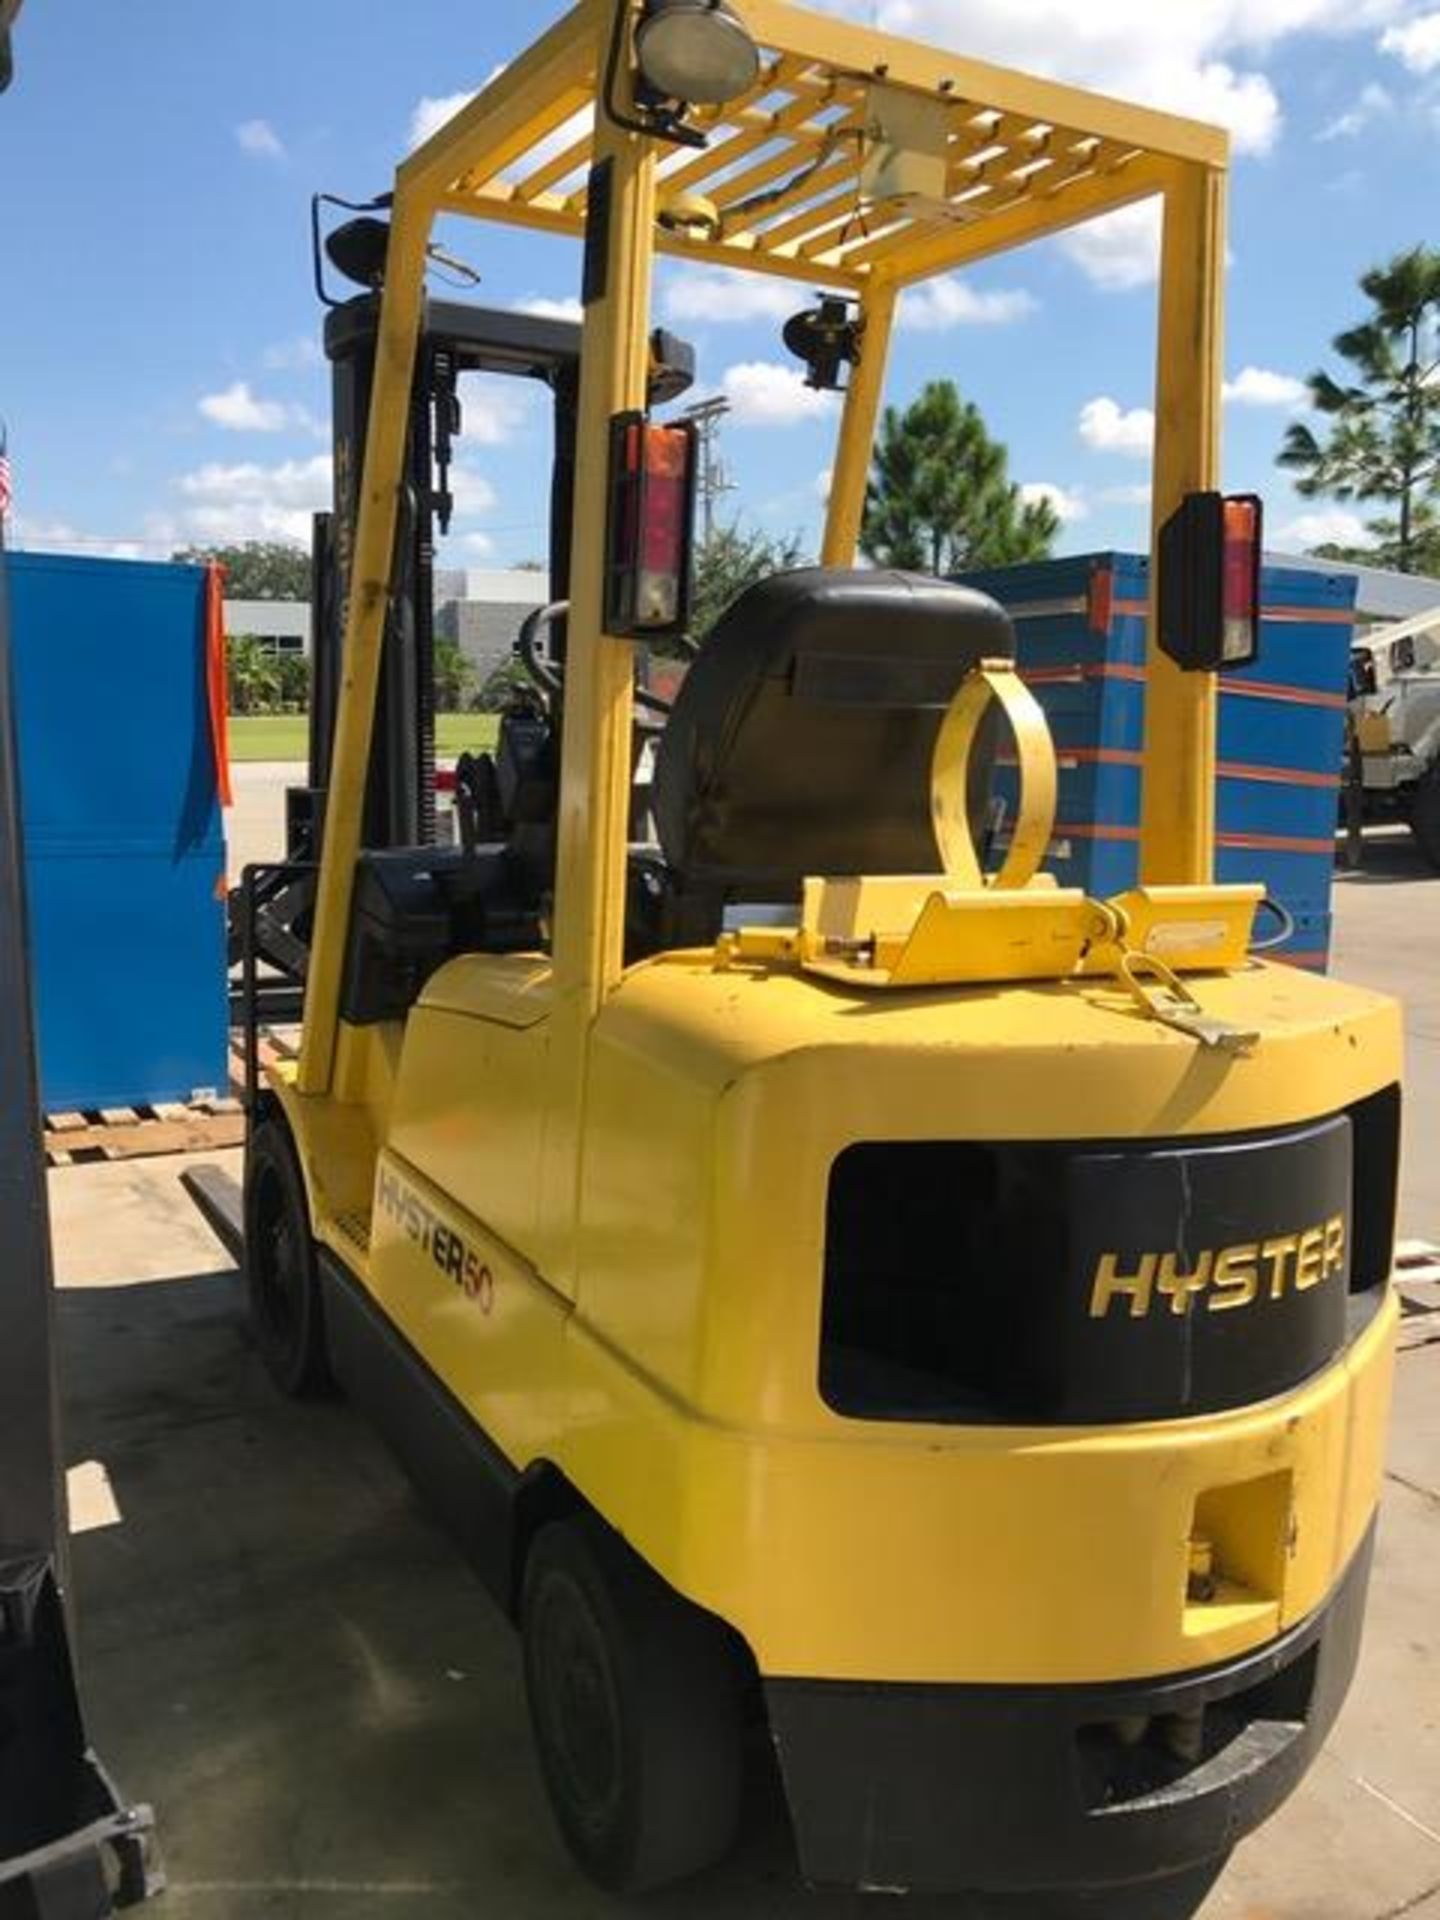 HYSTER LP GAS FORKLIFT MOD. S50XM, 2,900 LB LIFT CAP. 240" MAX HEIGHT - Image 4 of 7